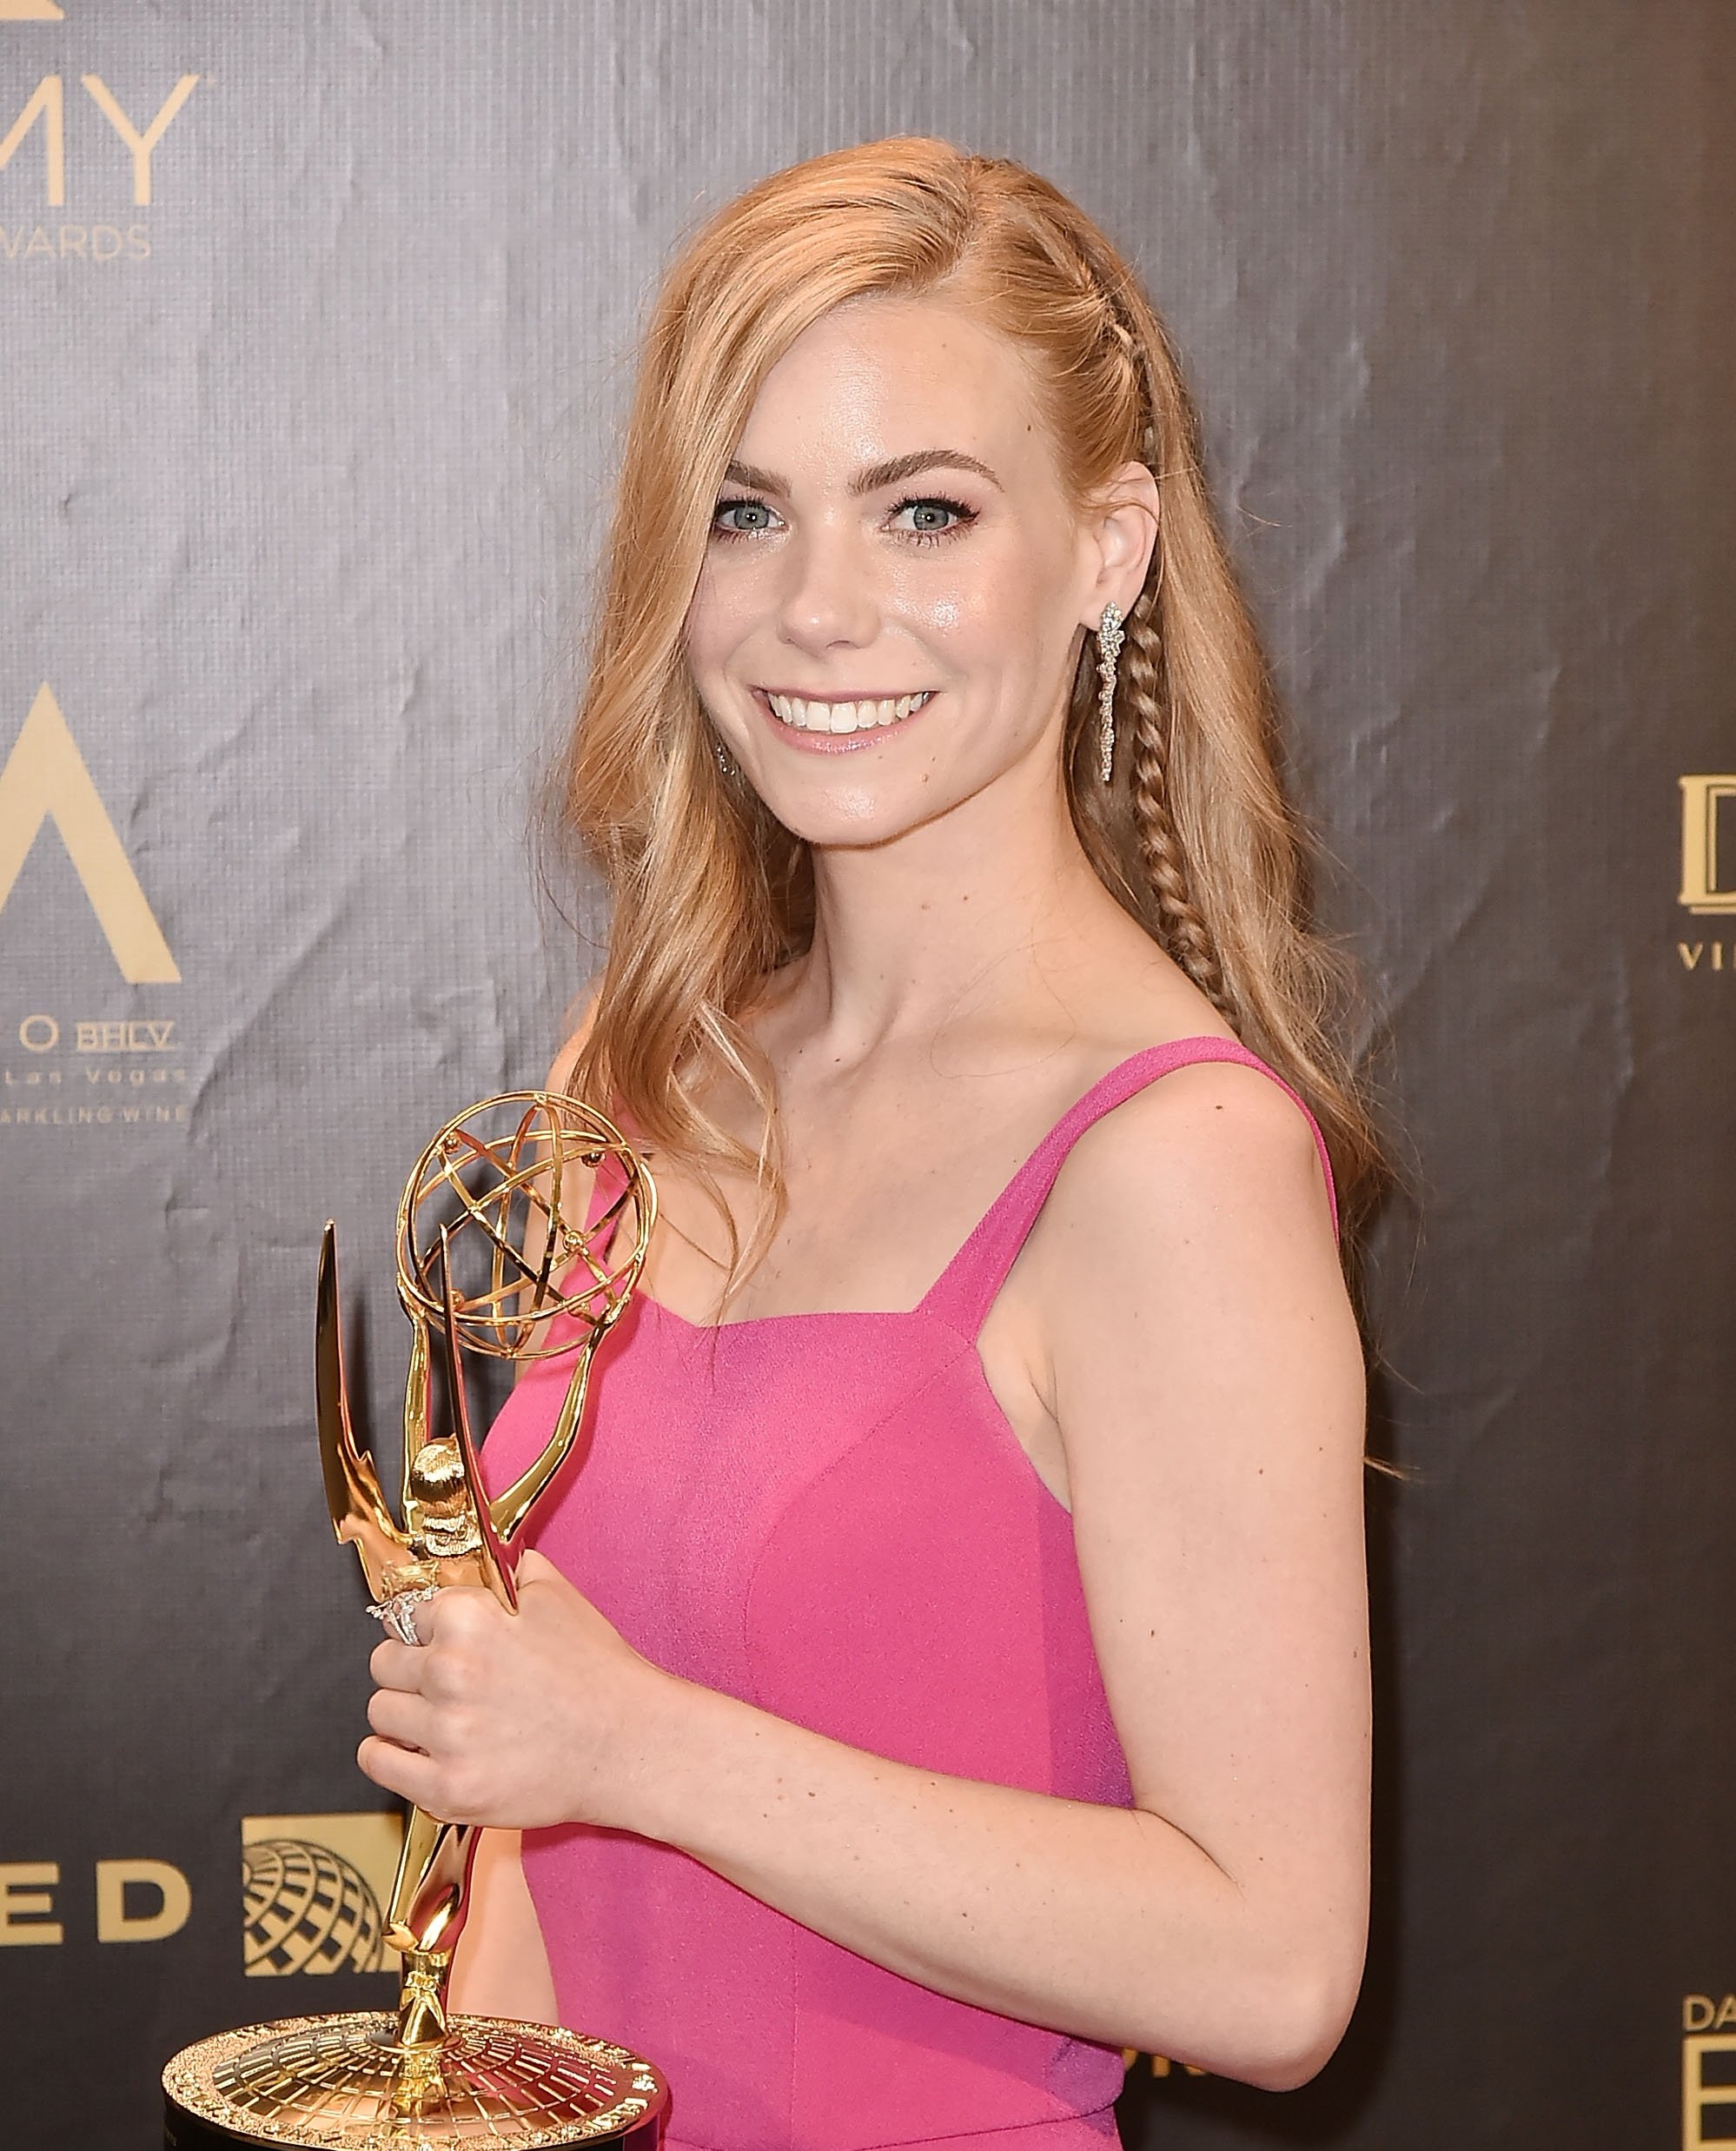 'General Hospital' star Chloe Lanier wearing a pink dress and holding her Daytime Emmy award.